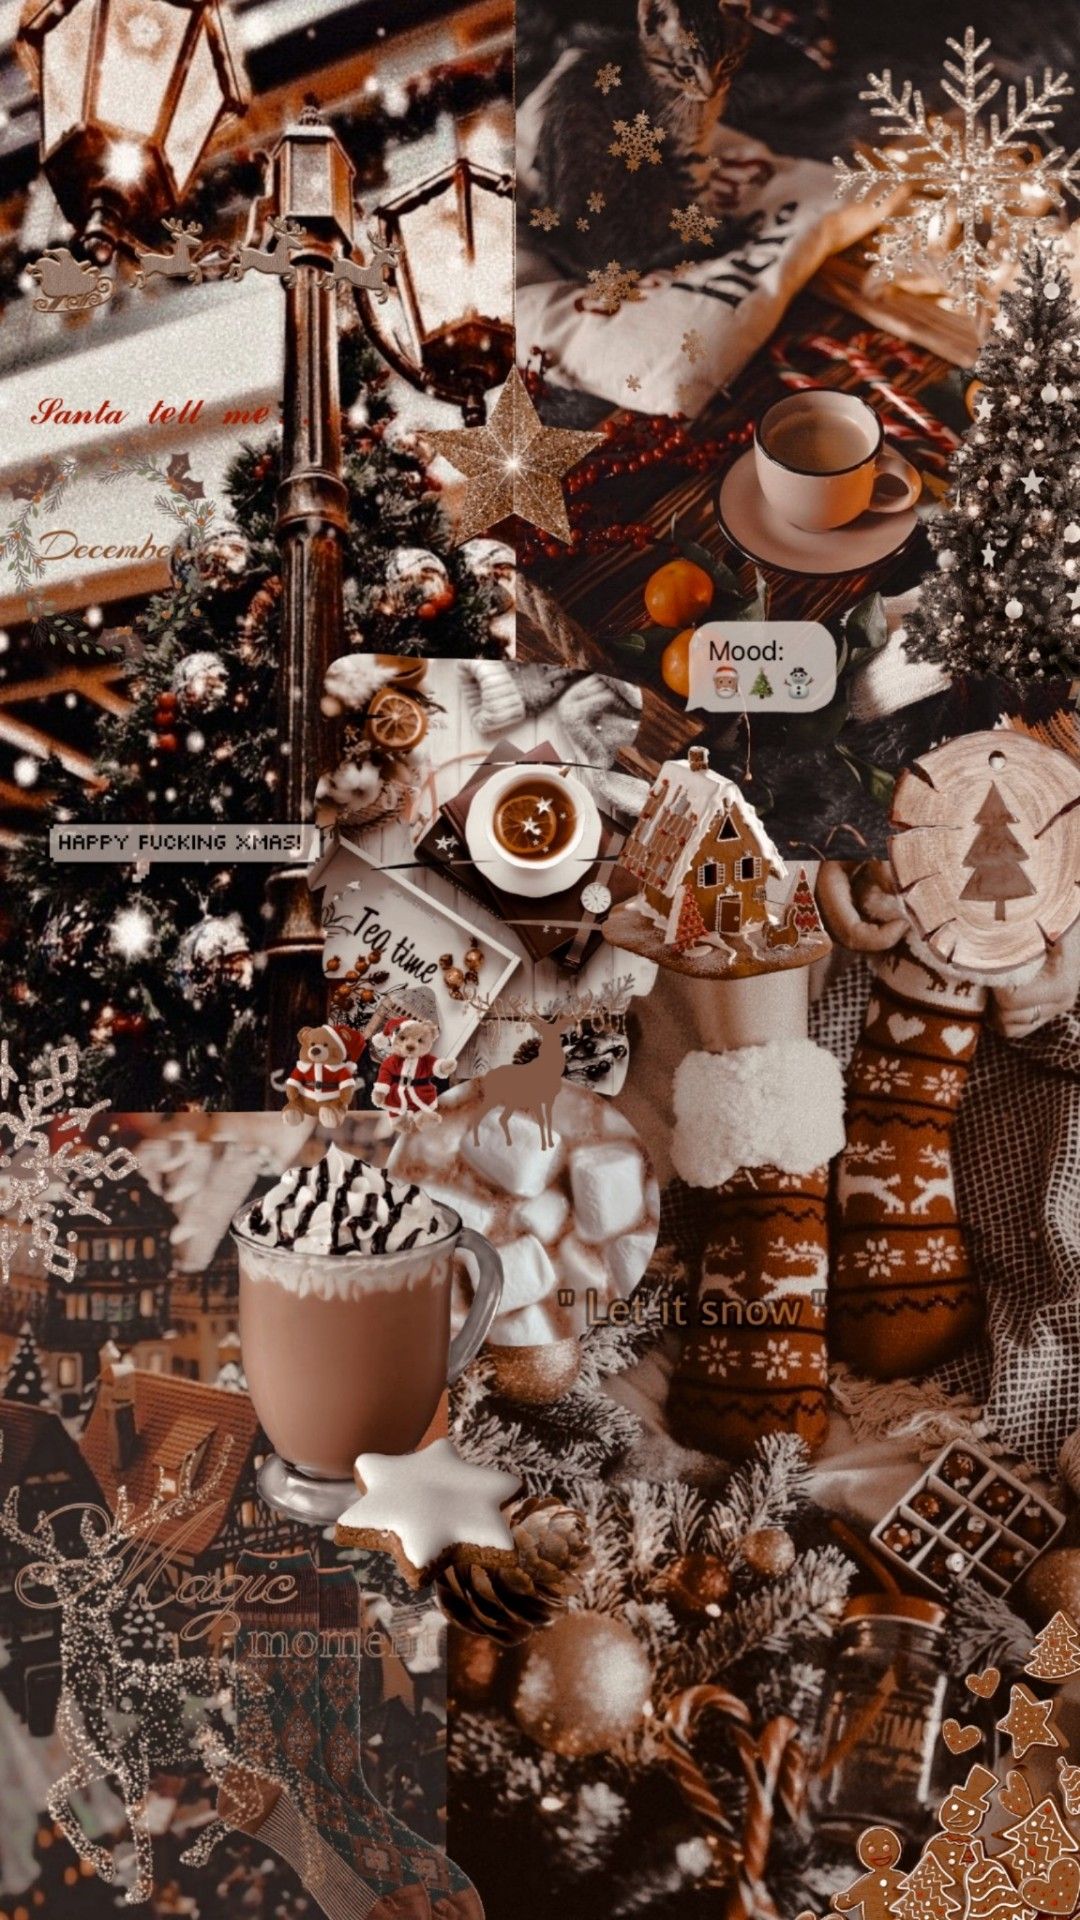 Aesthetic Christmas wallpaper for phone with brown and white colors - Warm